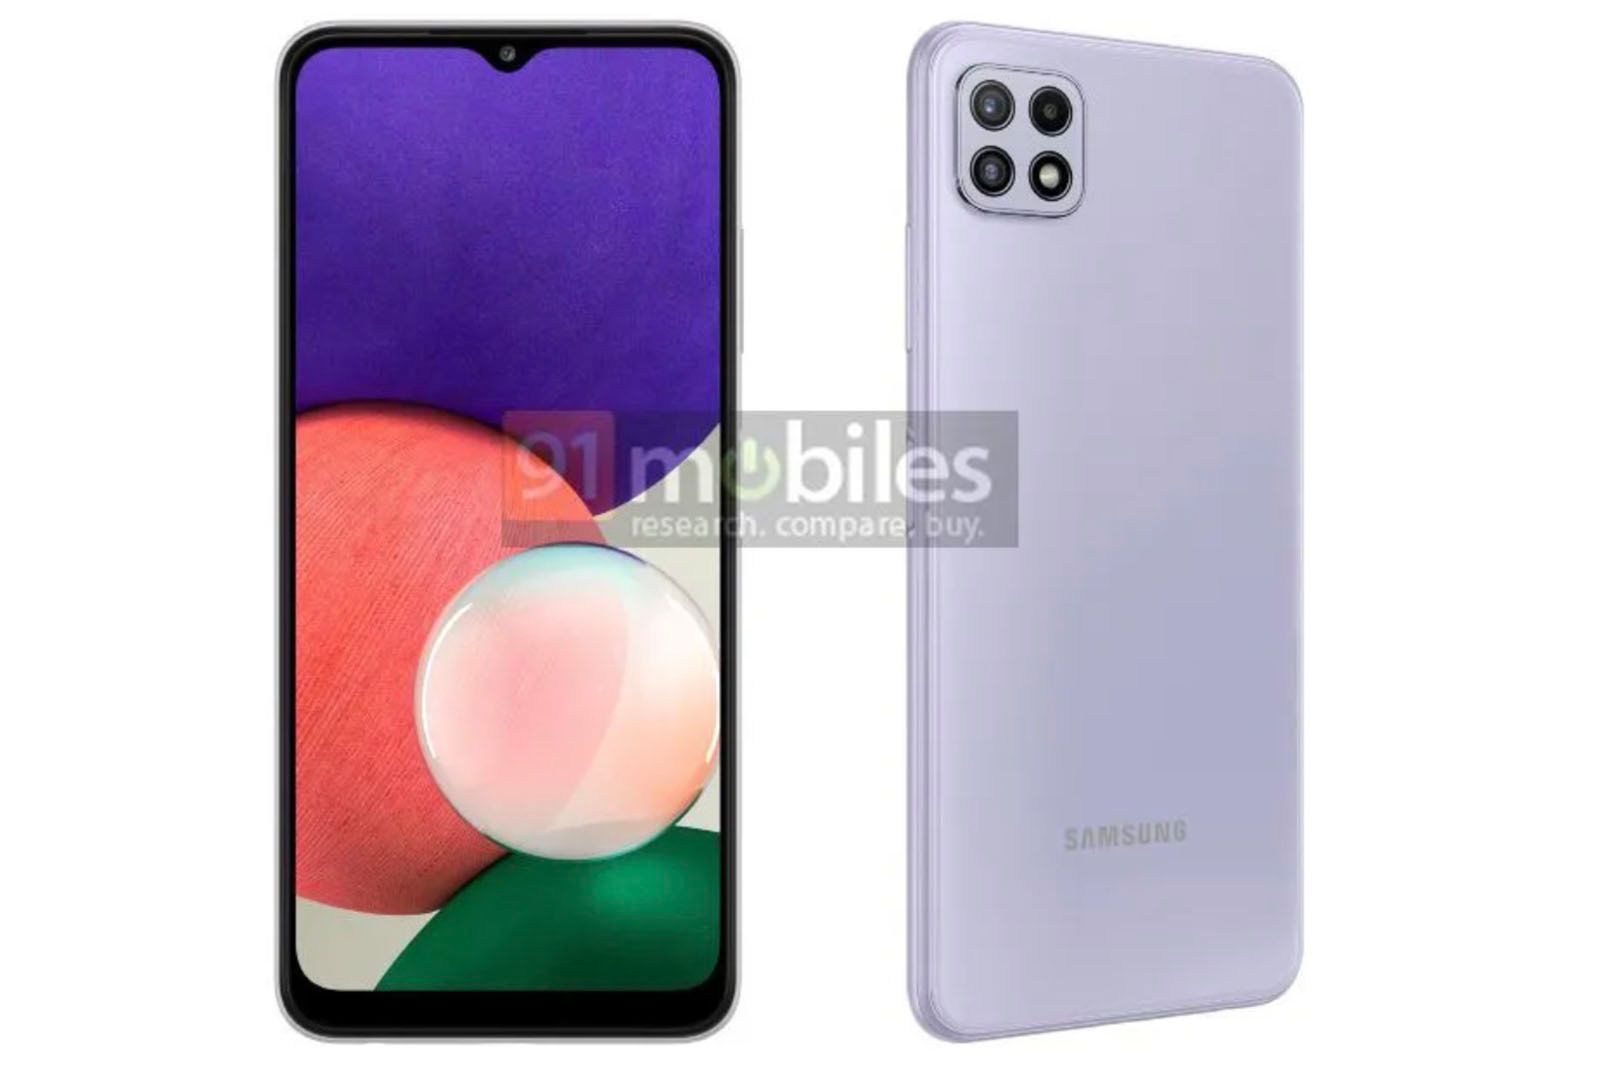 Leaked renders reveal an even more affordable 5G Samsung phone photo 1